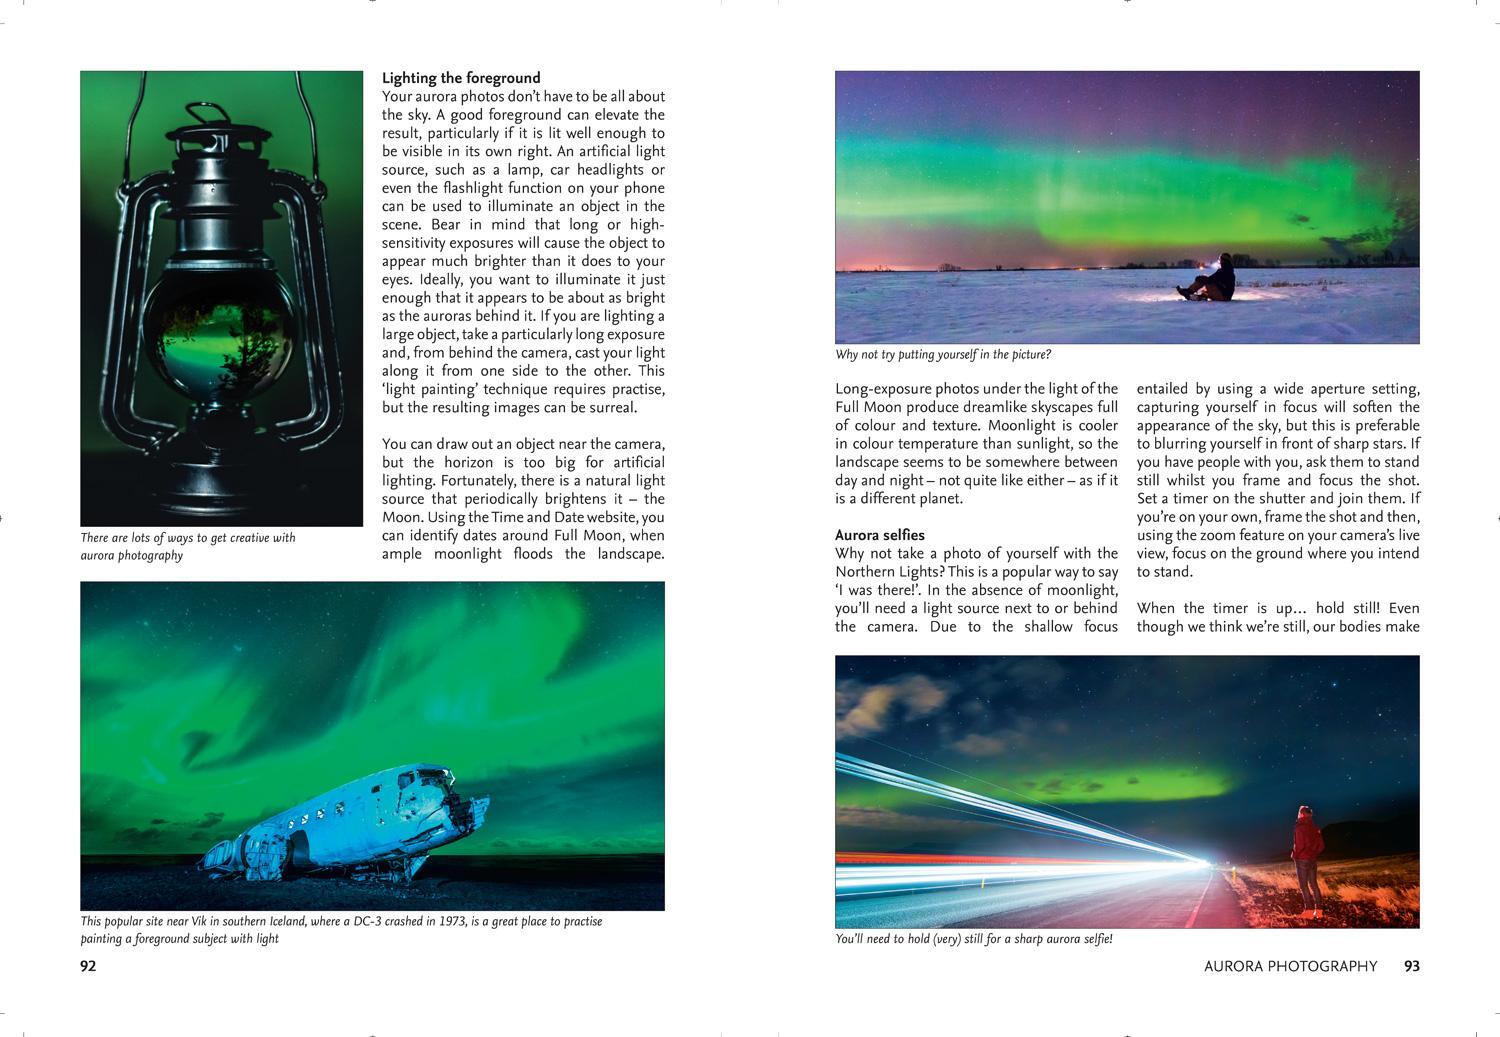 Bild: 9780008465551 | Northern Lights | The Definitive Guide to Auroras | Astronomy (u. a.)